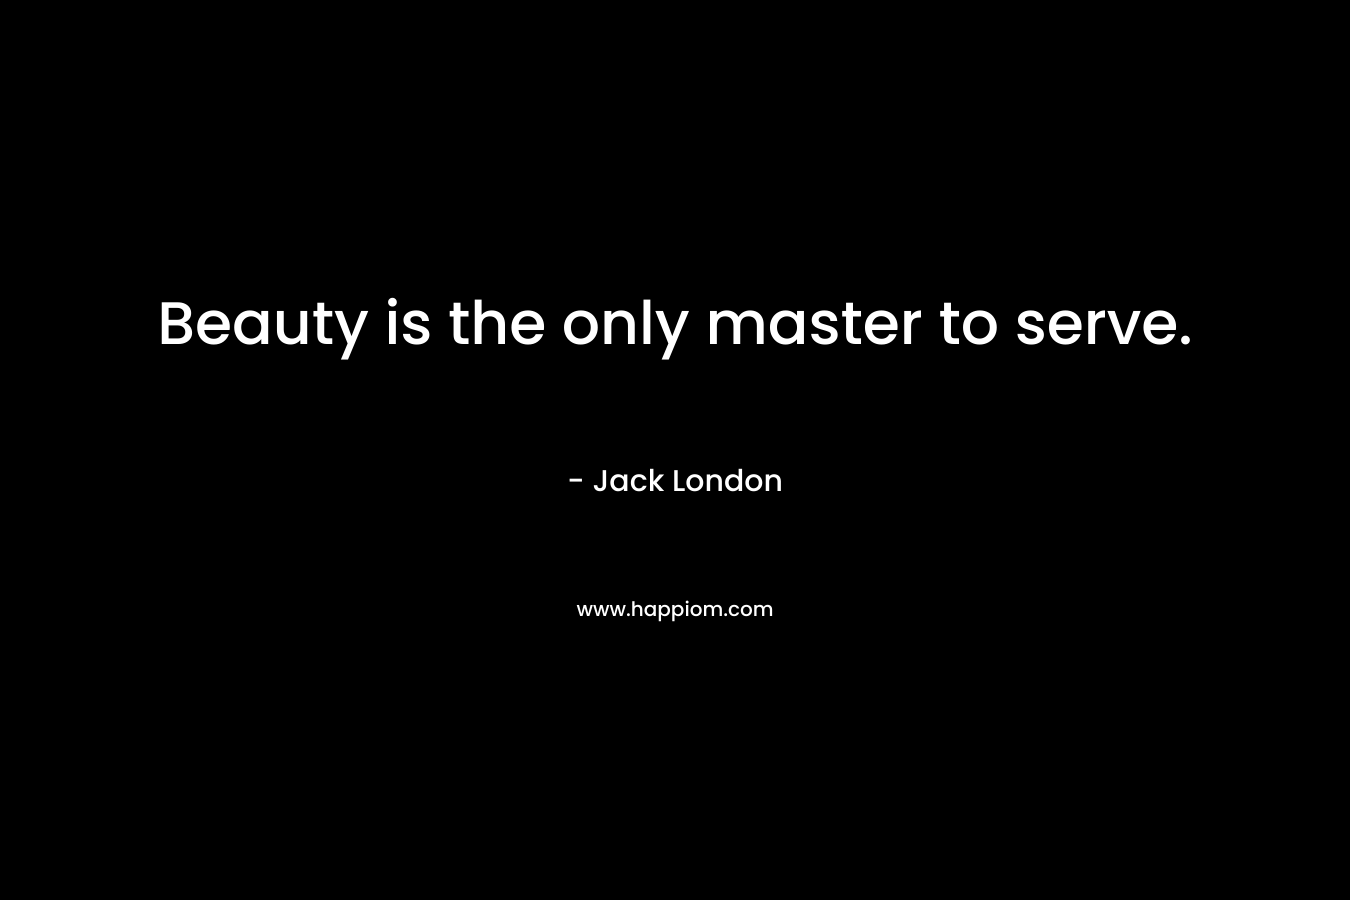 Beauty is the only master to serve.